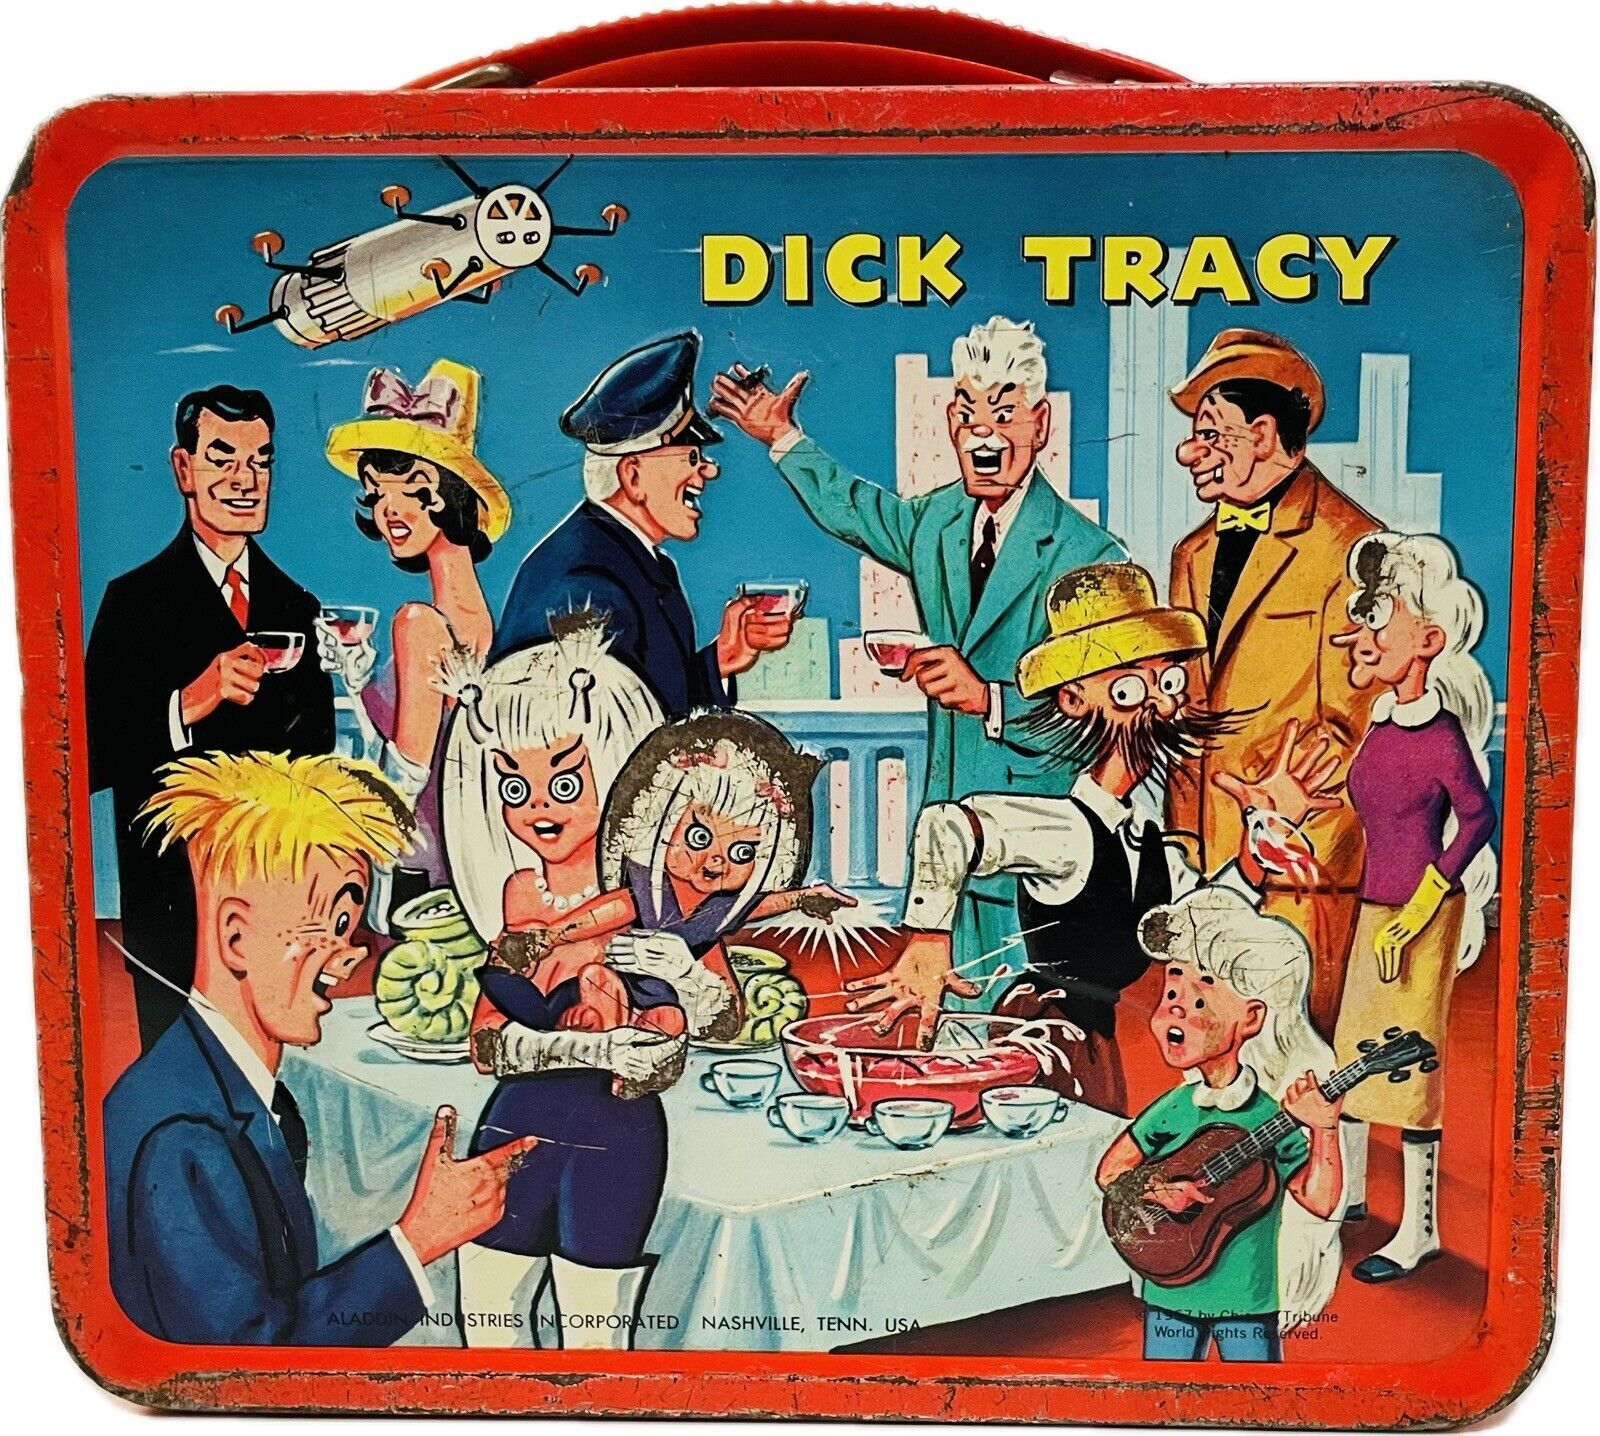 Vintage 1967 Dick Tracy Aladdin Brand Metal Lunchbox No Thermos